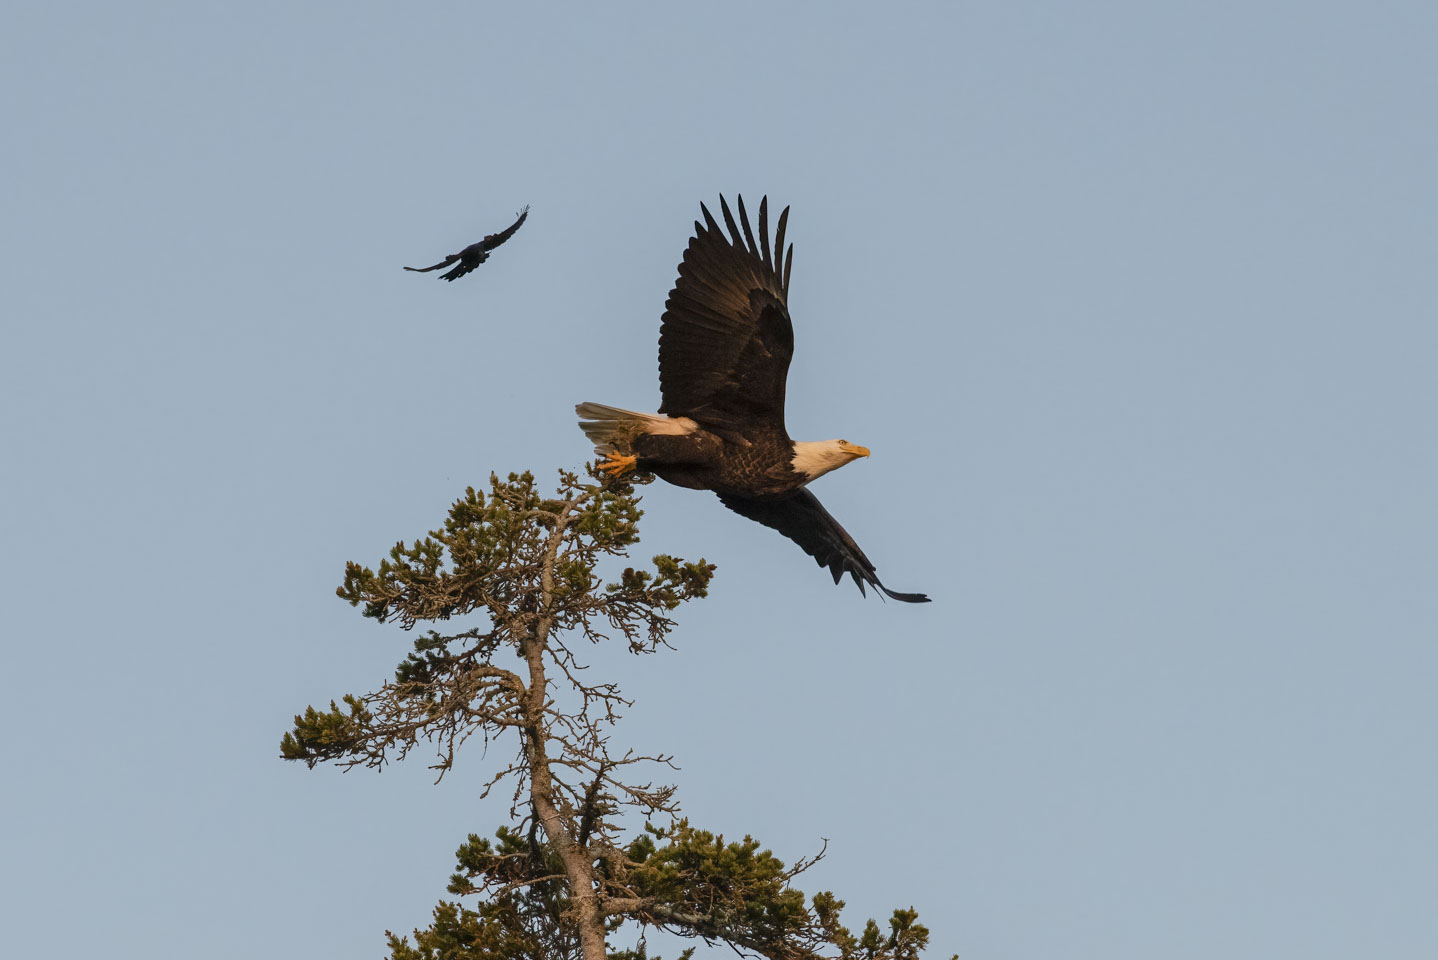 Small black bird flying by an Eagle that is going into flight